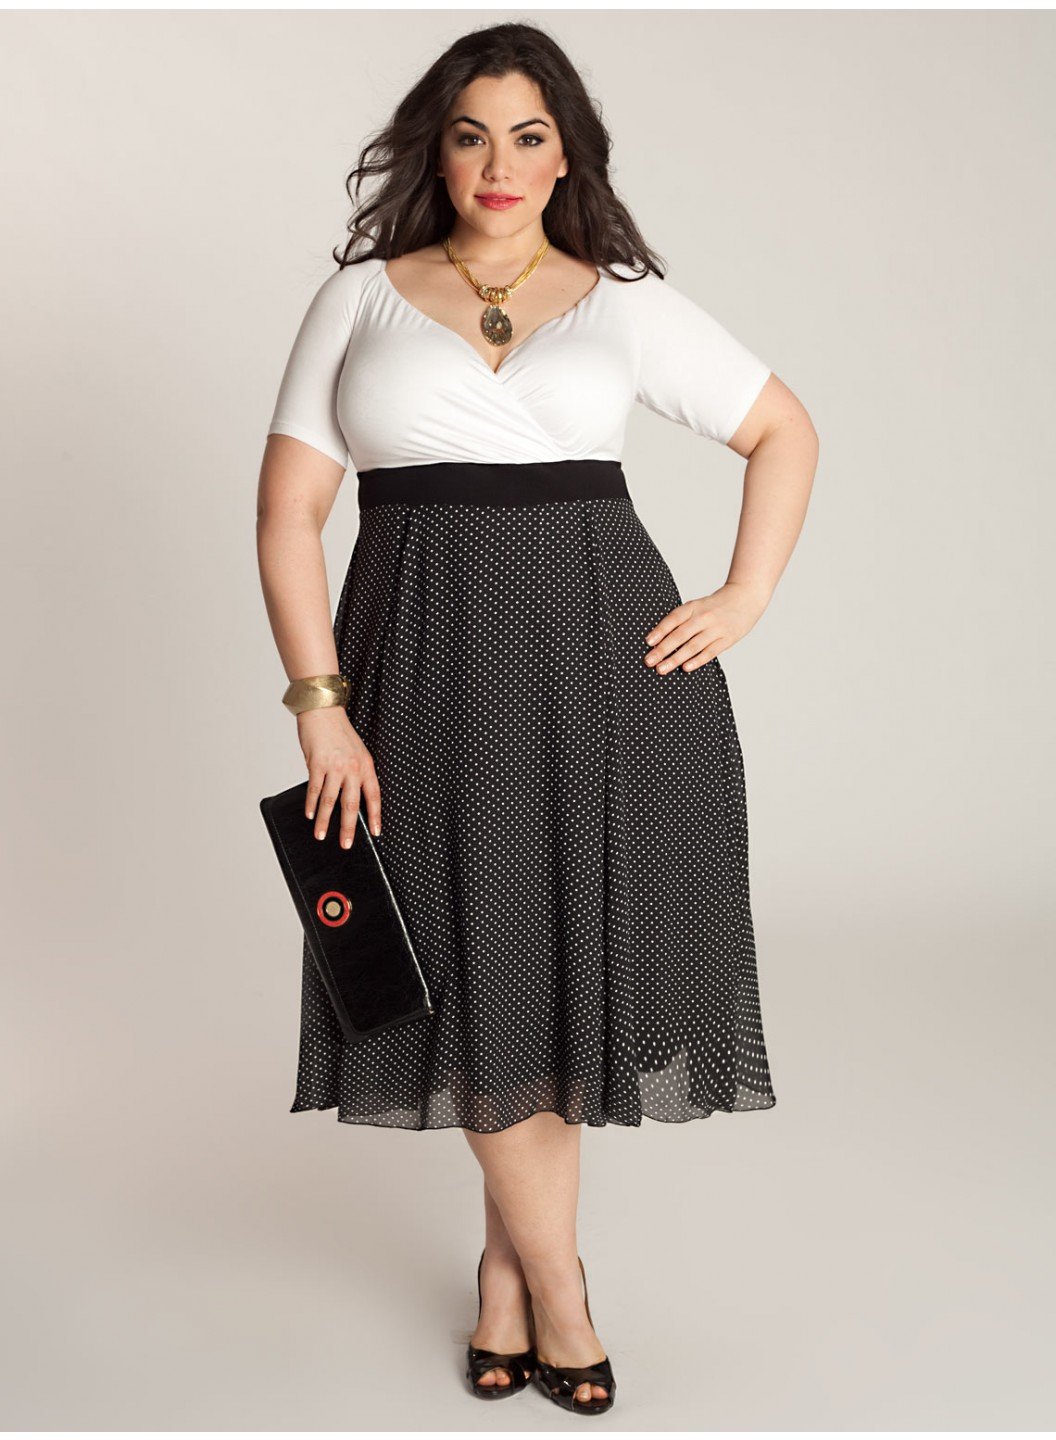 Look Charming in a Plus Size Cocktail Dresses - Ohh My My